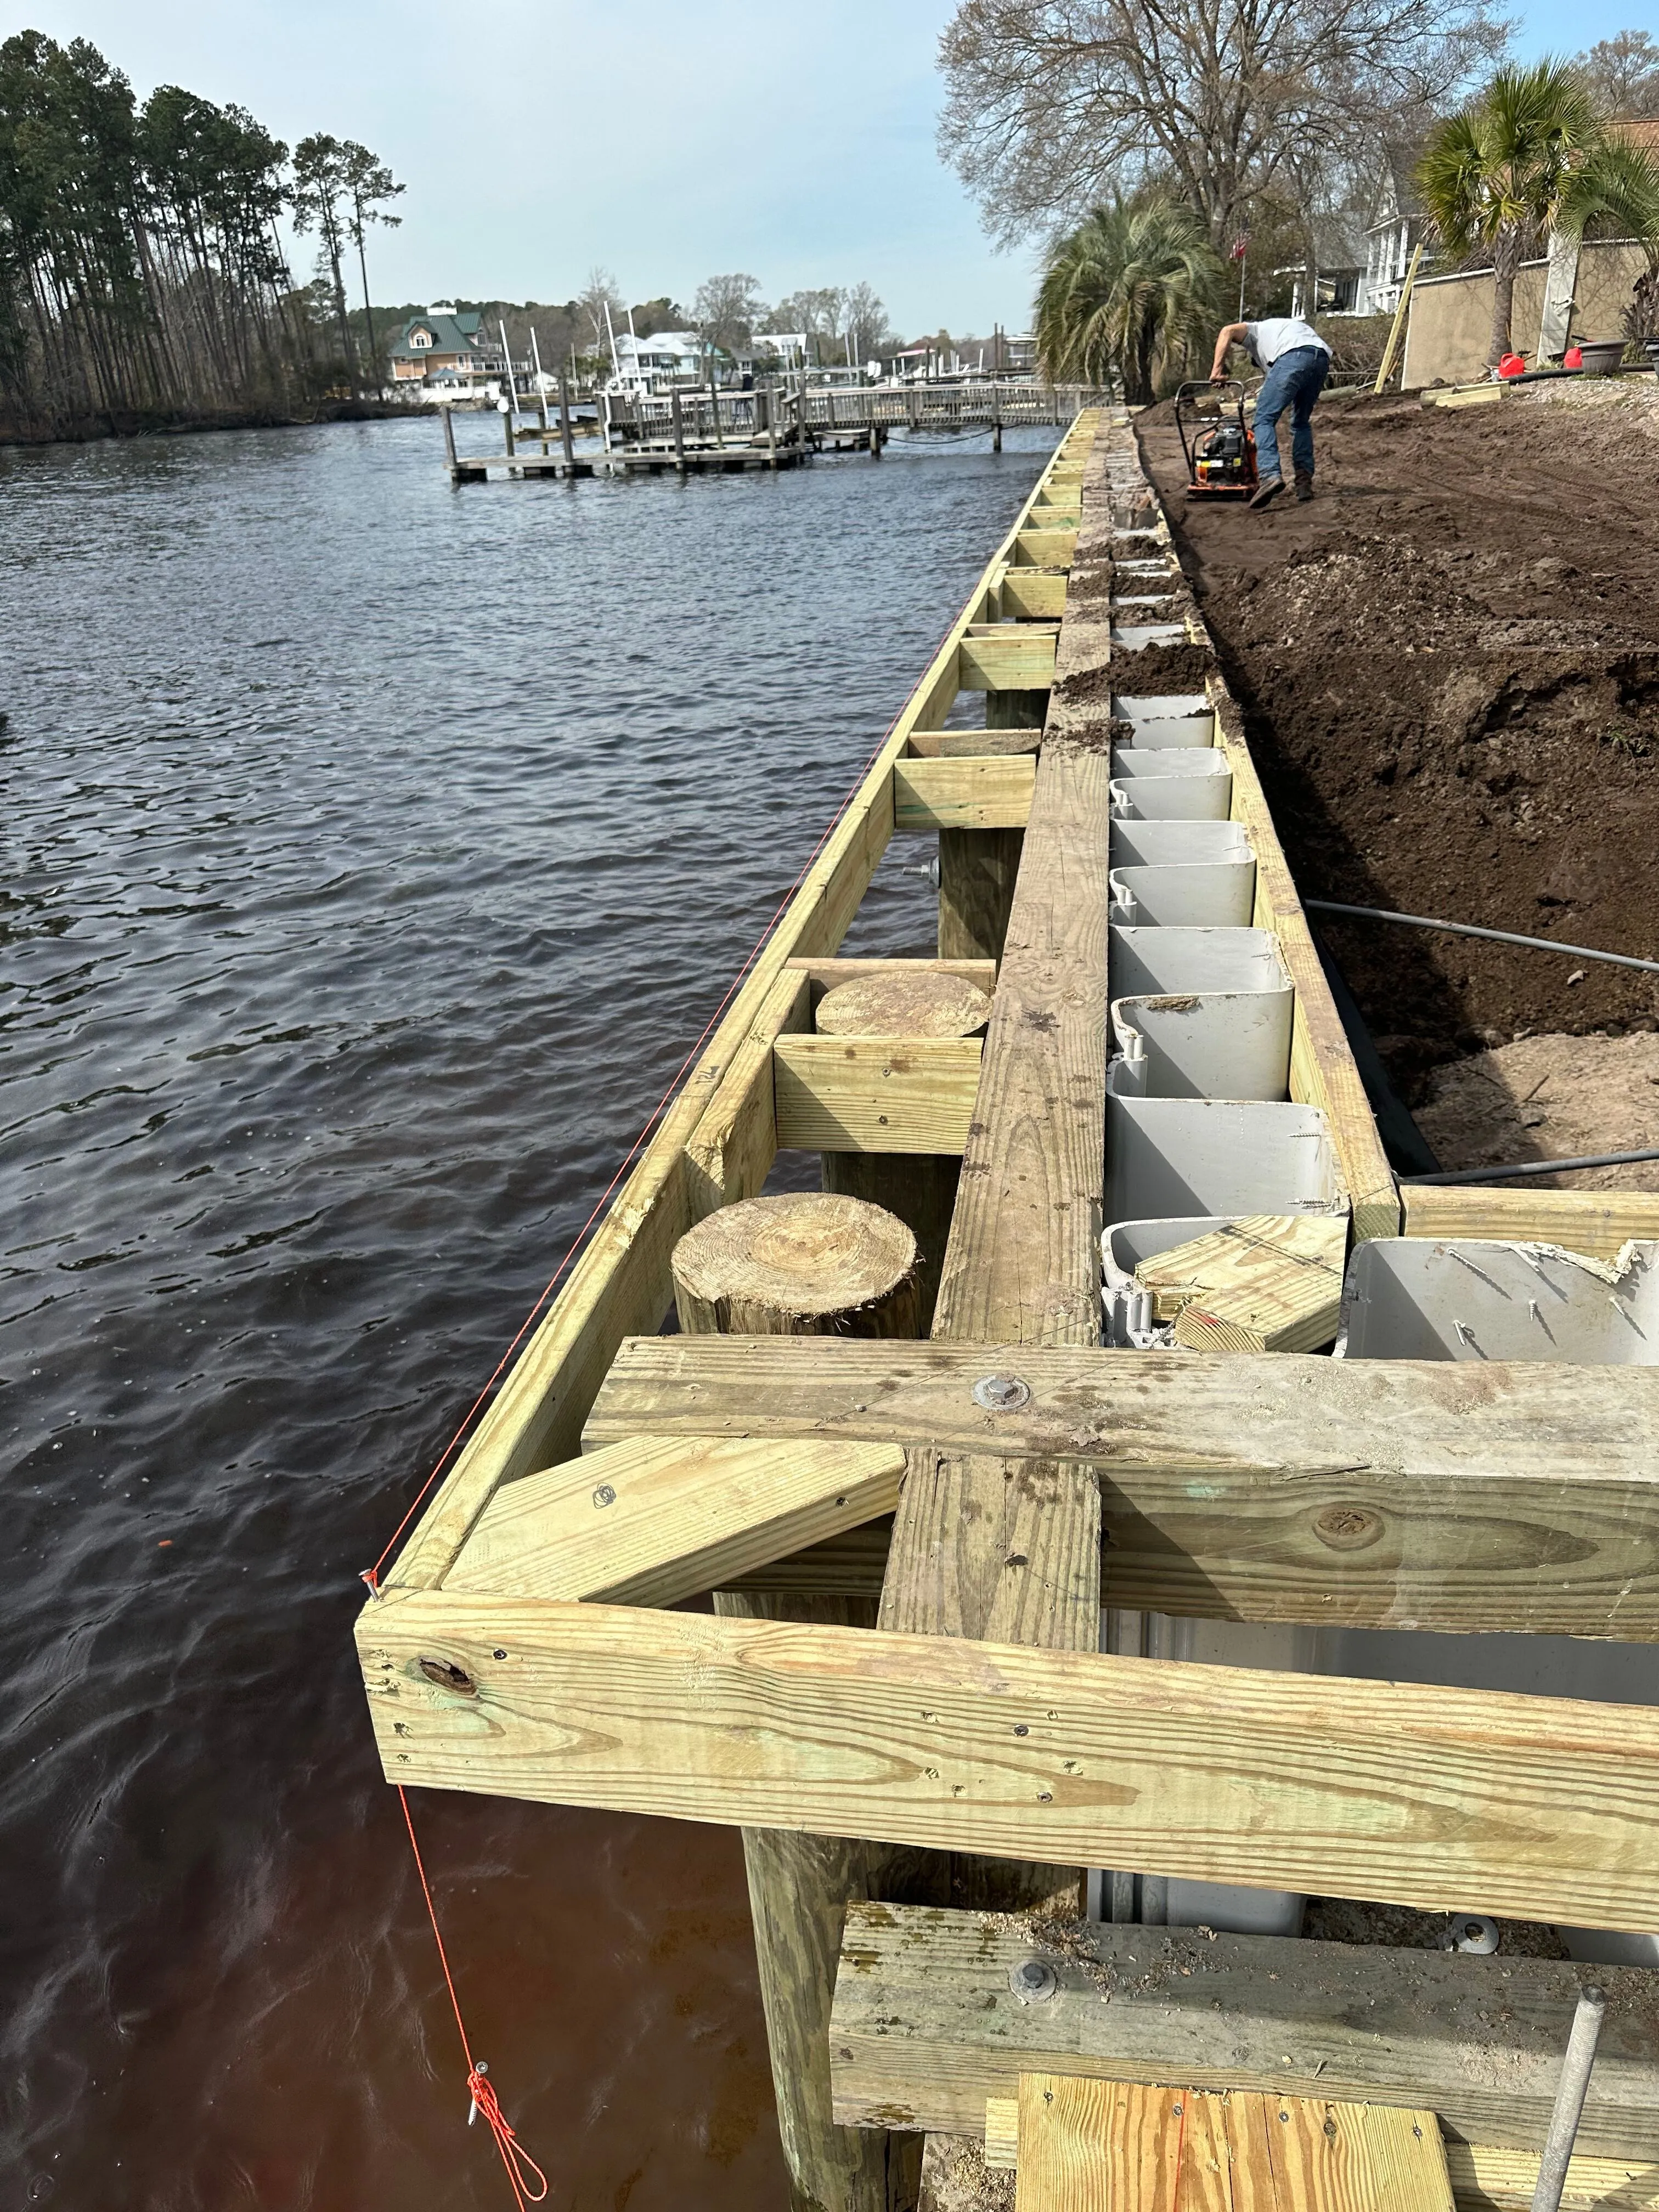 Vinyl Bulkhead with composite wood cap under construction in Myrtle Beach SC on the Intracoastal Waterway built by Waterbridge Contractors of the Carolinas